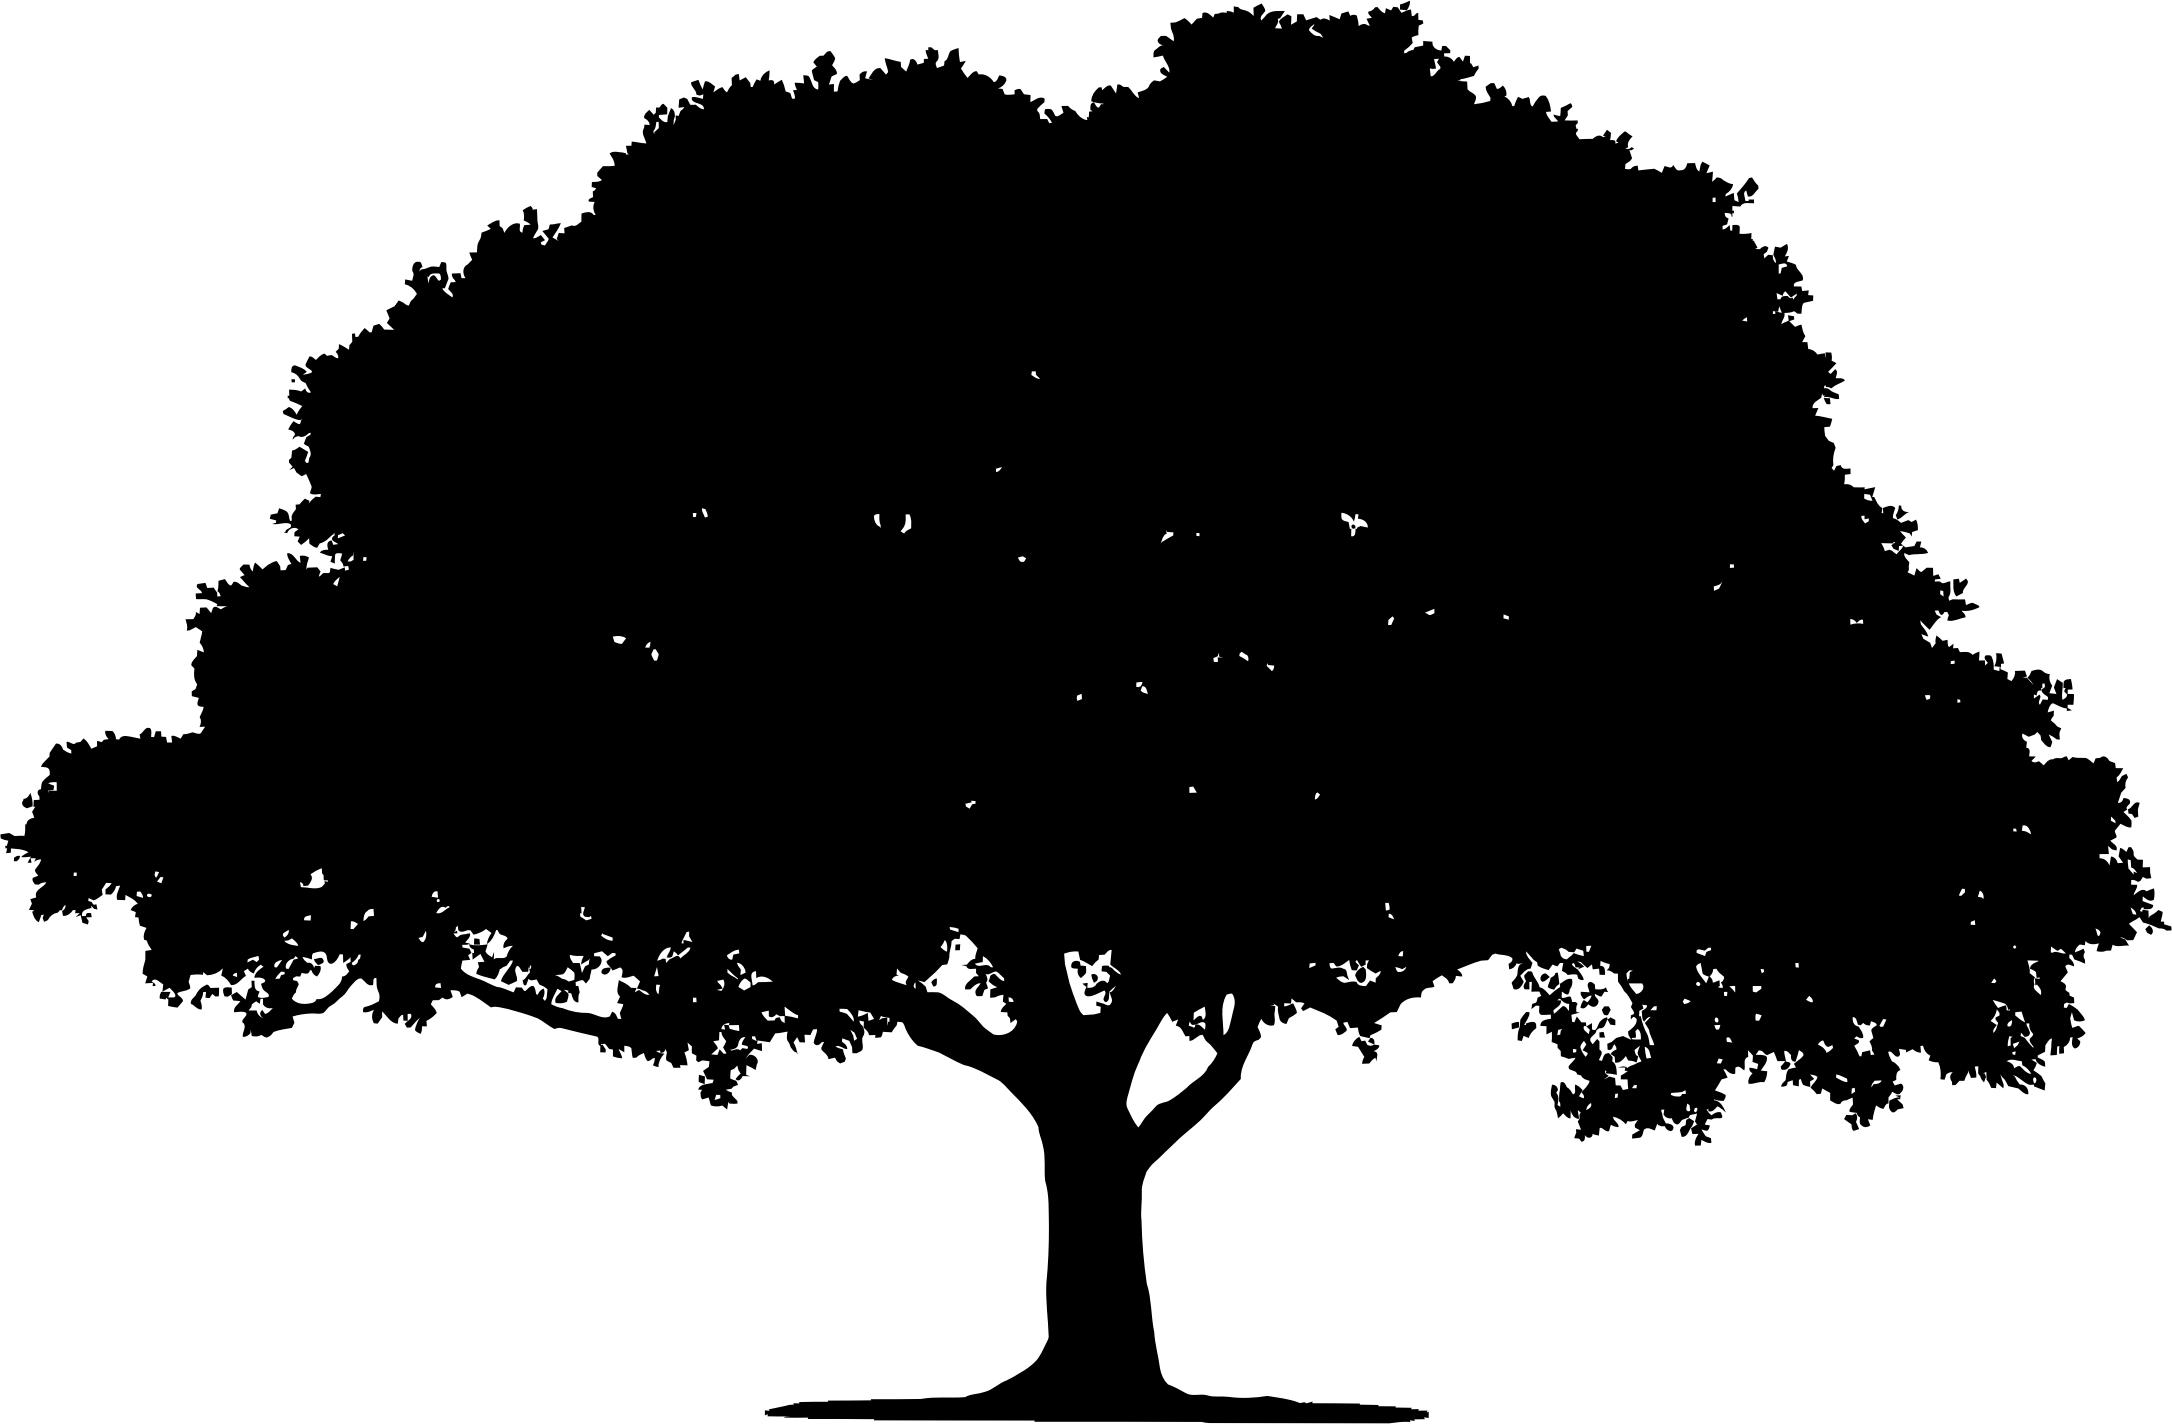 Lonely Tree Silhouette 3 png